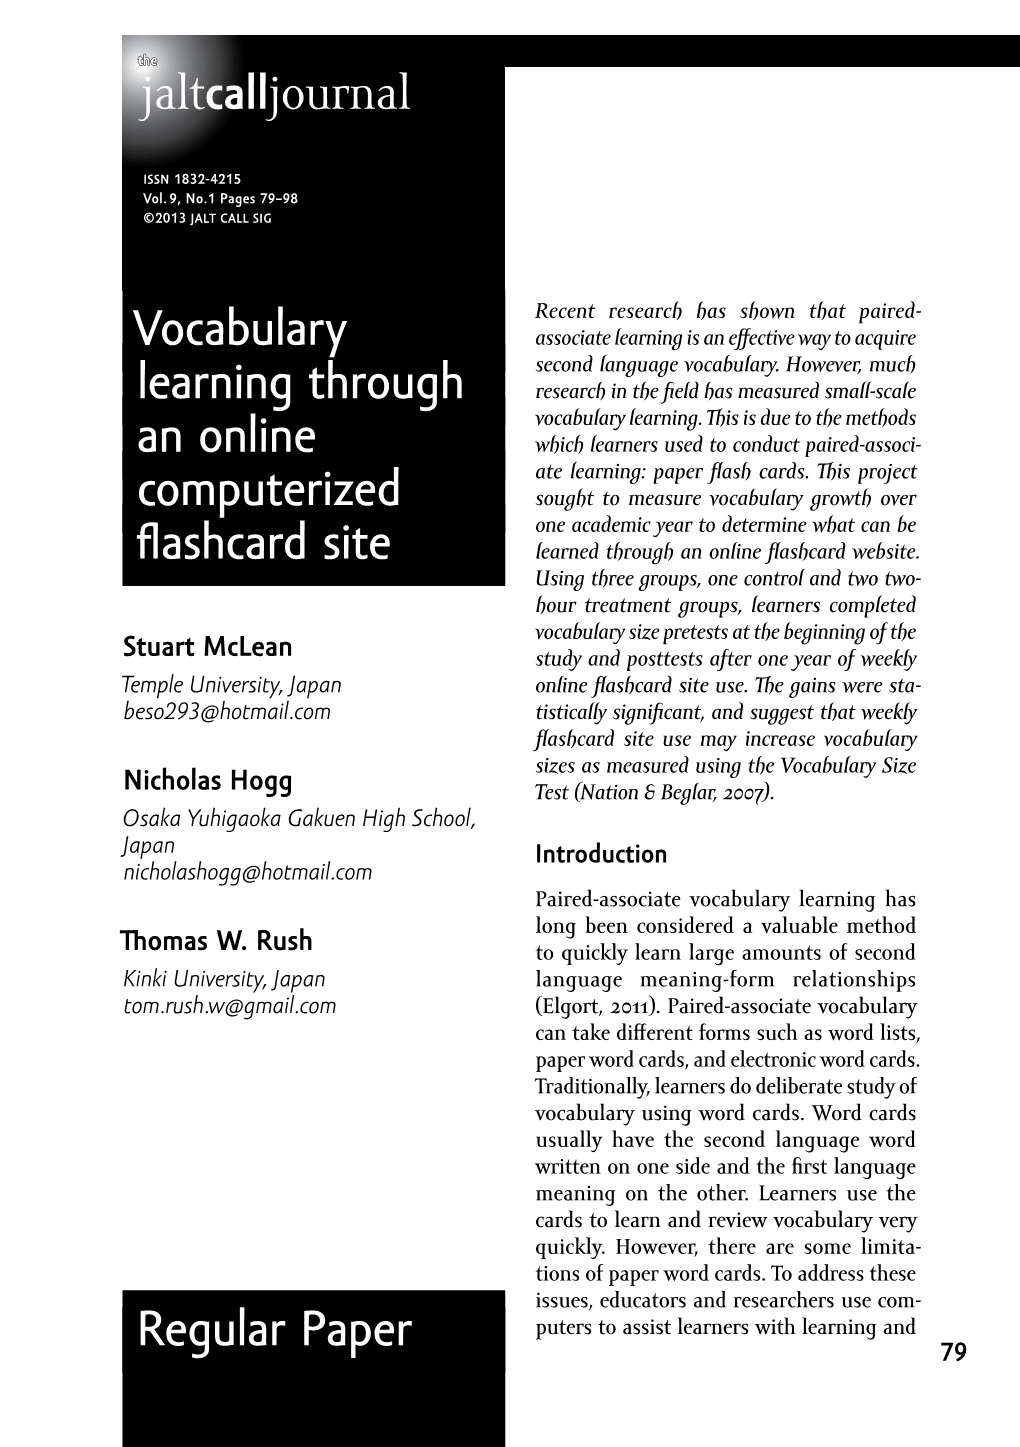 Regular Paper Vocabulary Learning Through an Online Computerized